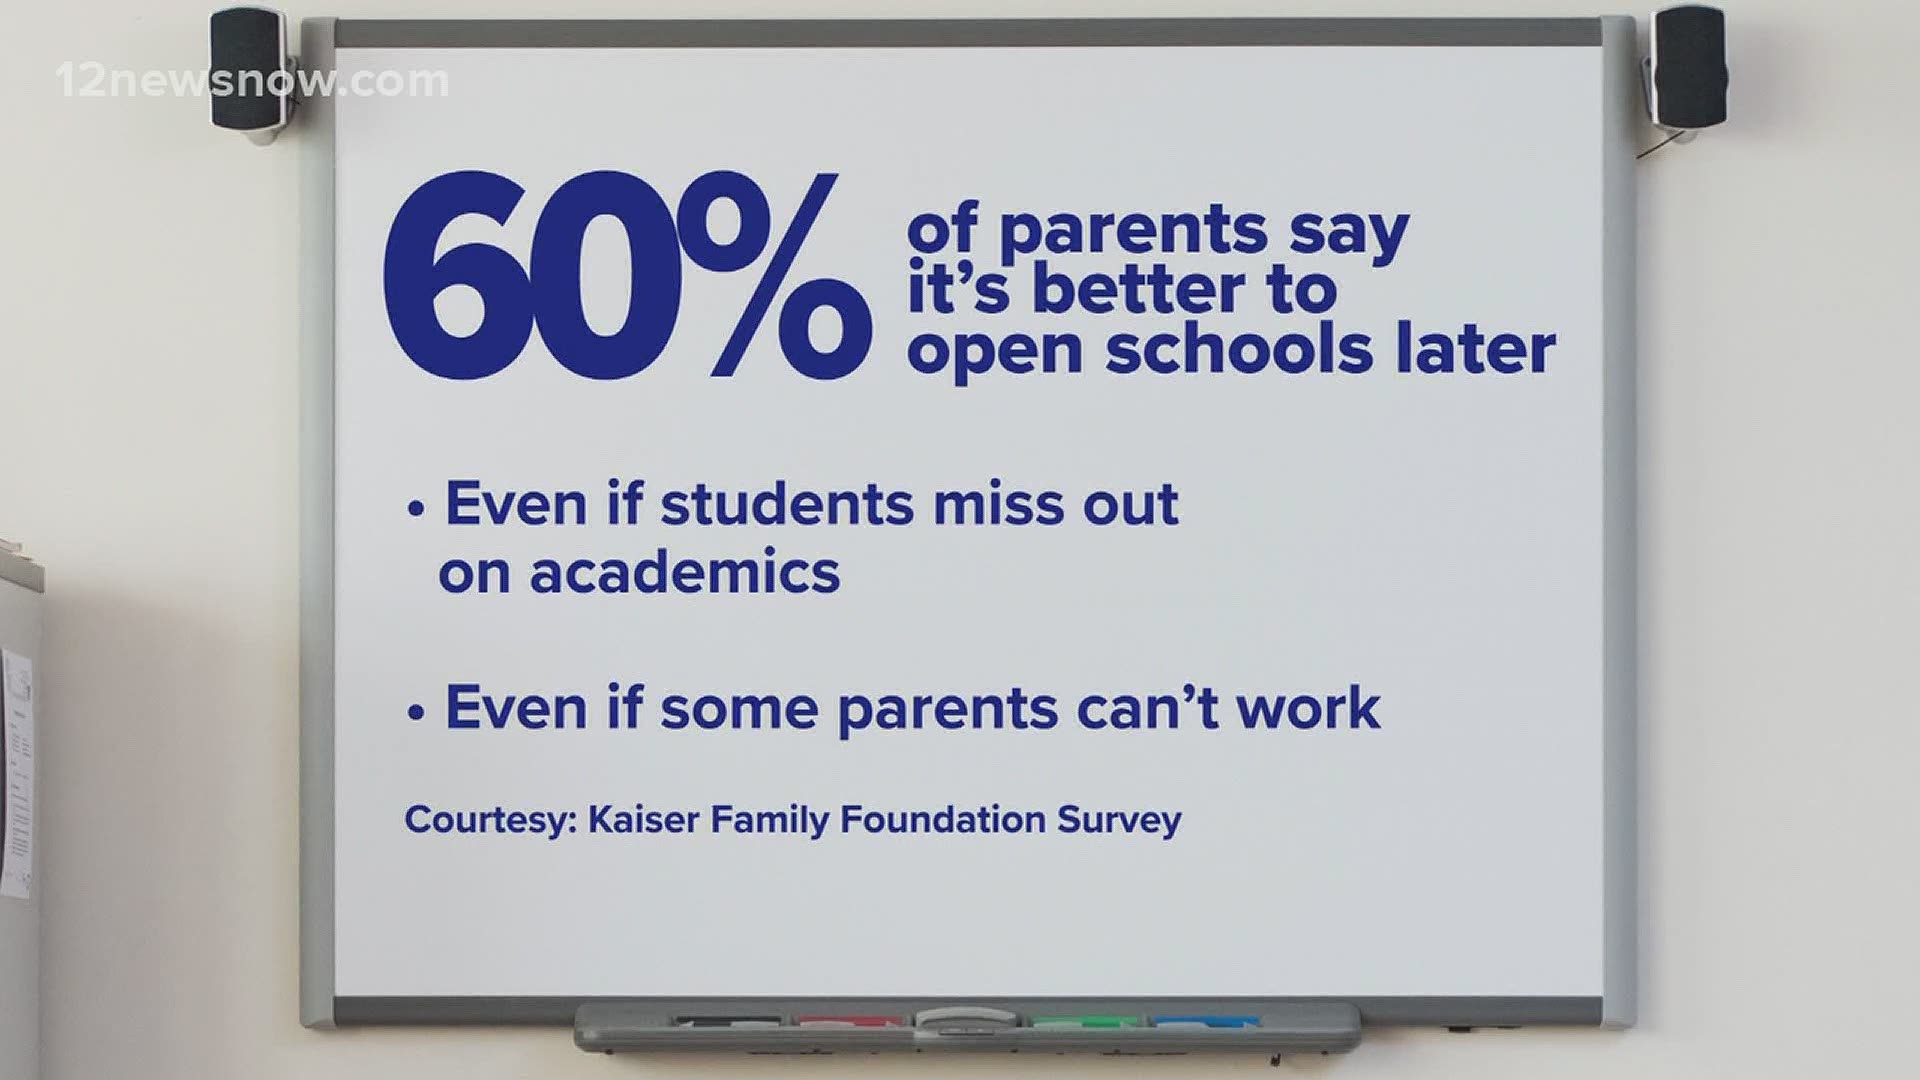 60% of parents who participated in the survey say it's better for schools to open later